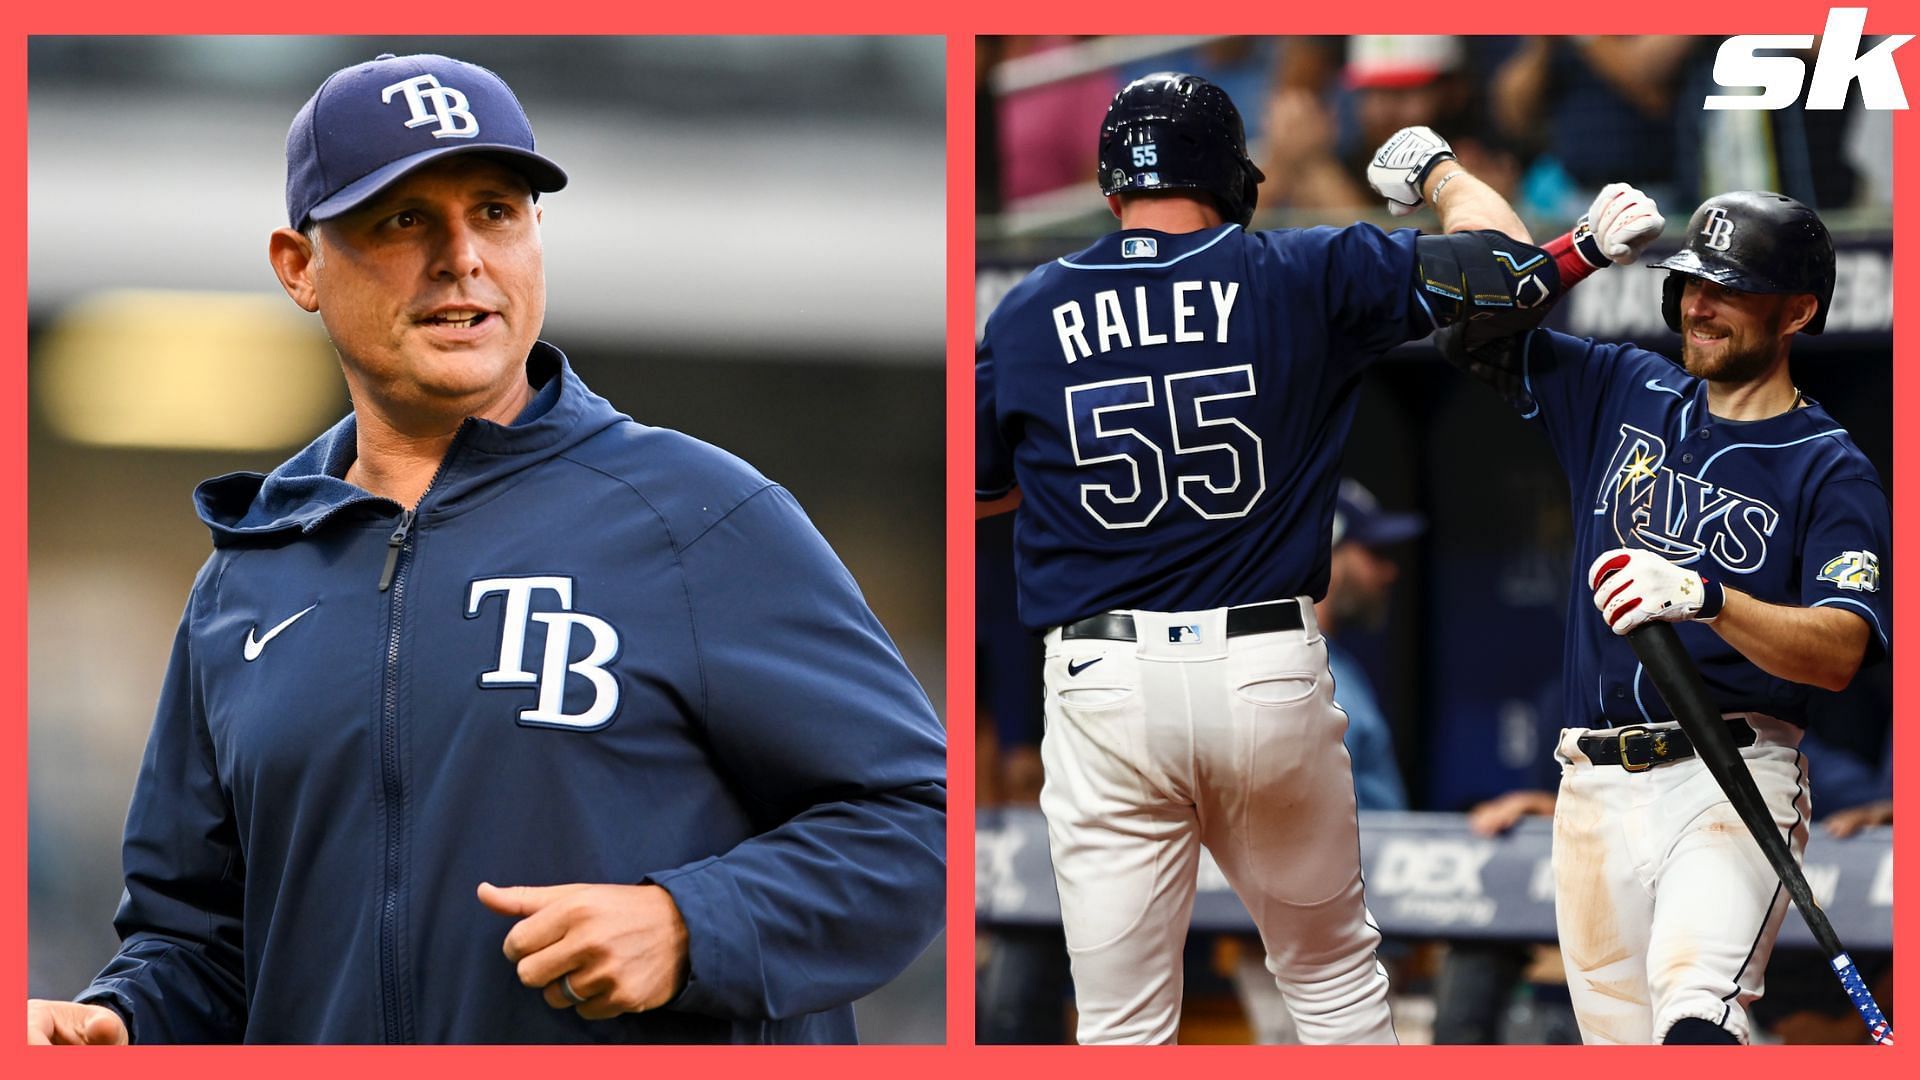 MLB insider believes Tampa Bay Rays will make big moves in trade